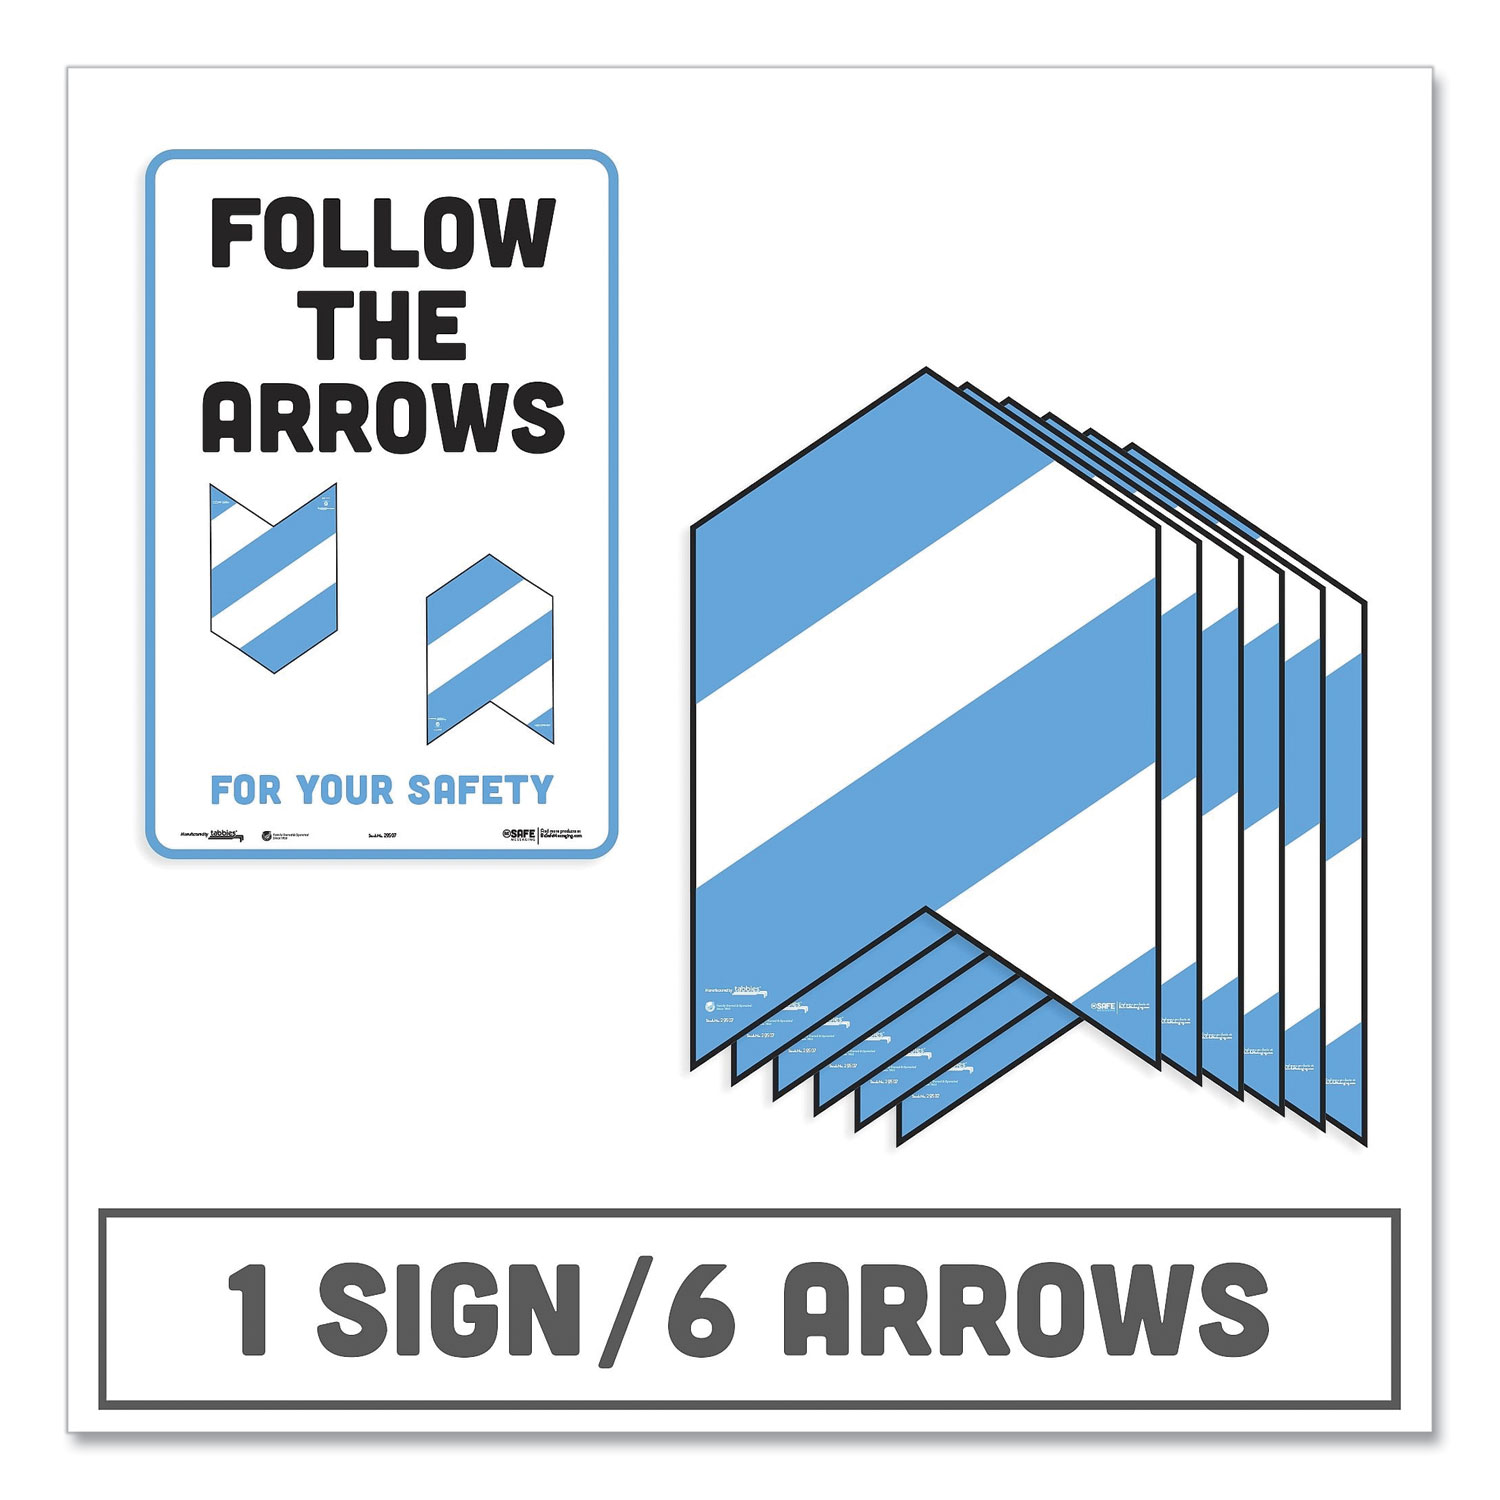  Tabbies 29507 BeSafe Messaging Education Floor Arrows and Wall Sign, Follow The Arrows For Your Safety, 12x18, White/Blue, 6 Arrows, 1 Sign (TAB29507) 